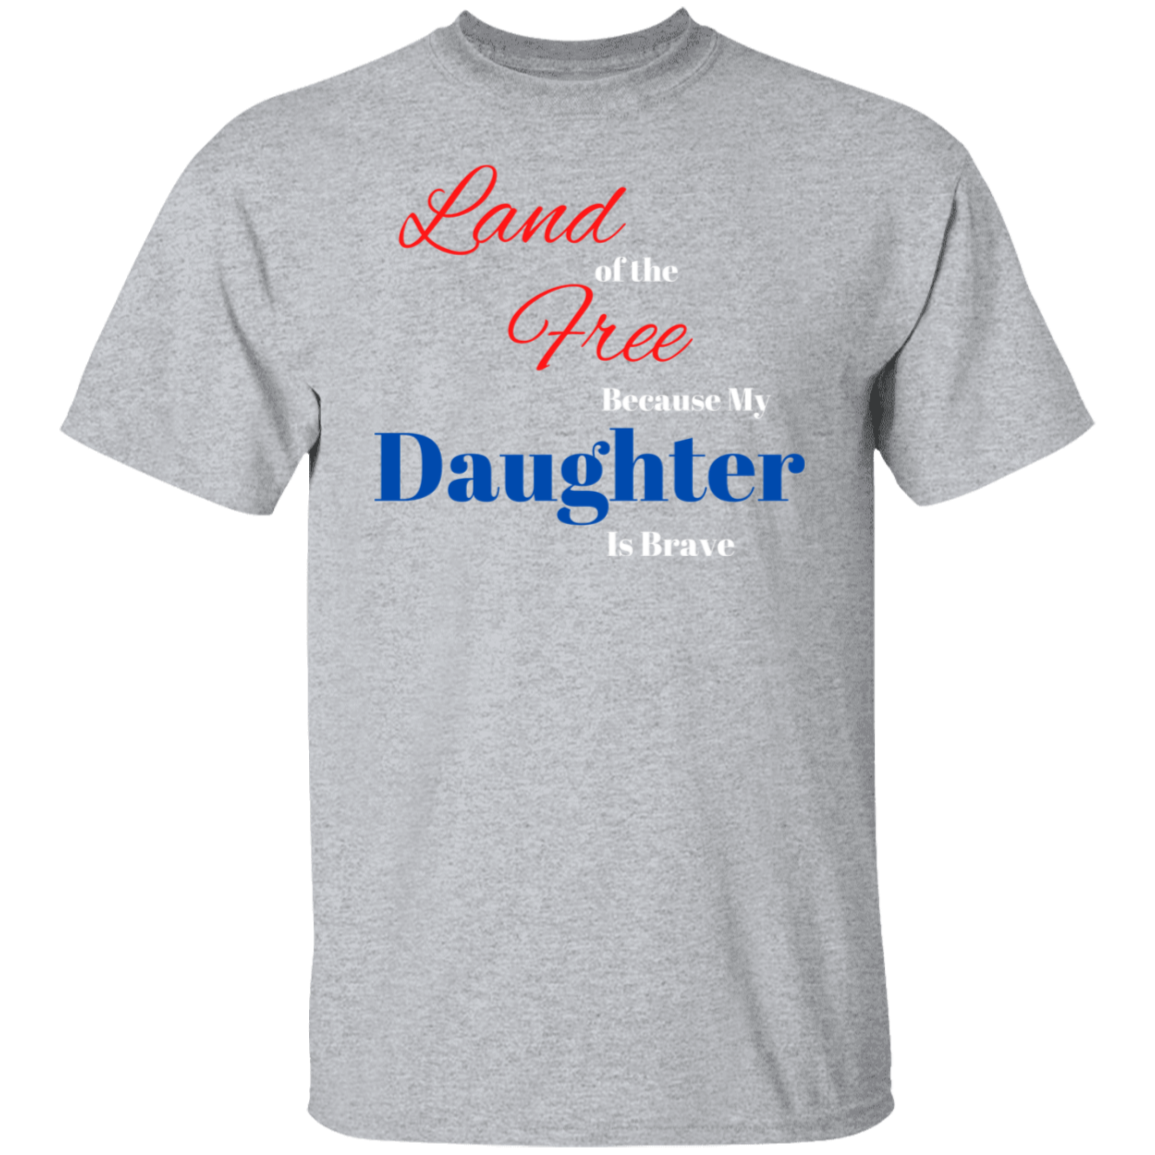 Land of the Free | Daughter T-Shirt